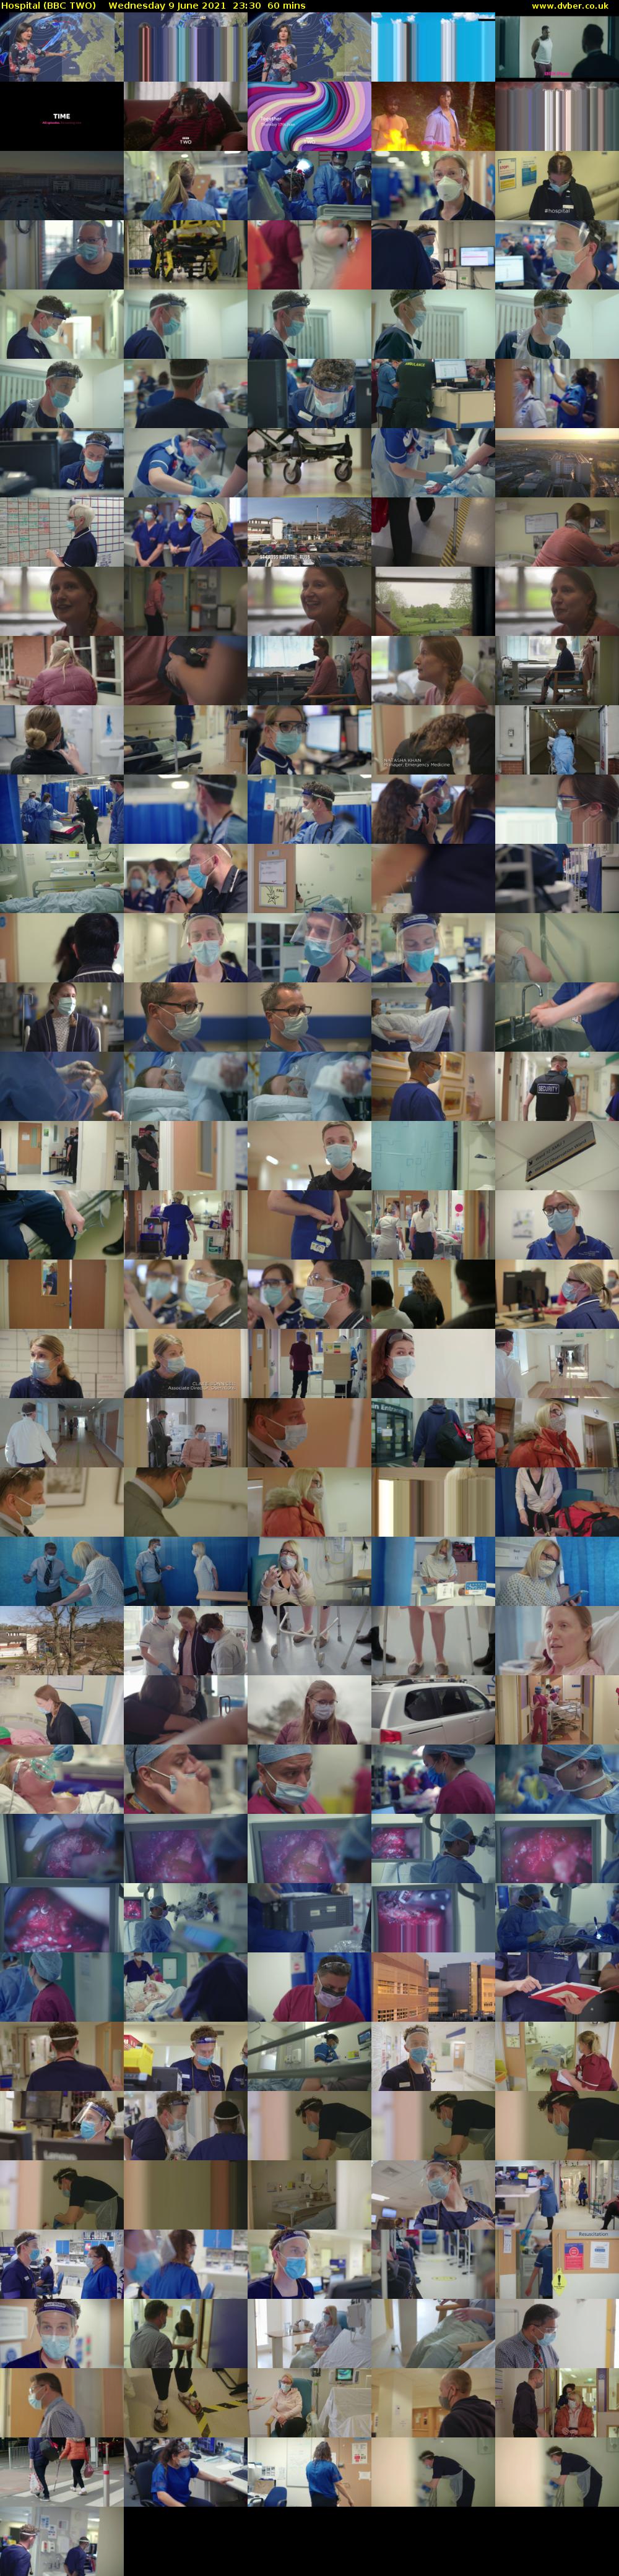 Hospital (BBC TWO) Wednesday 9 June 2021 23:30 - 00:30